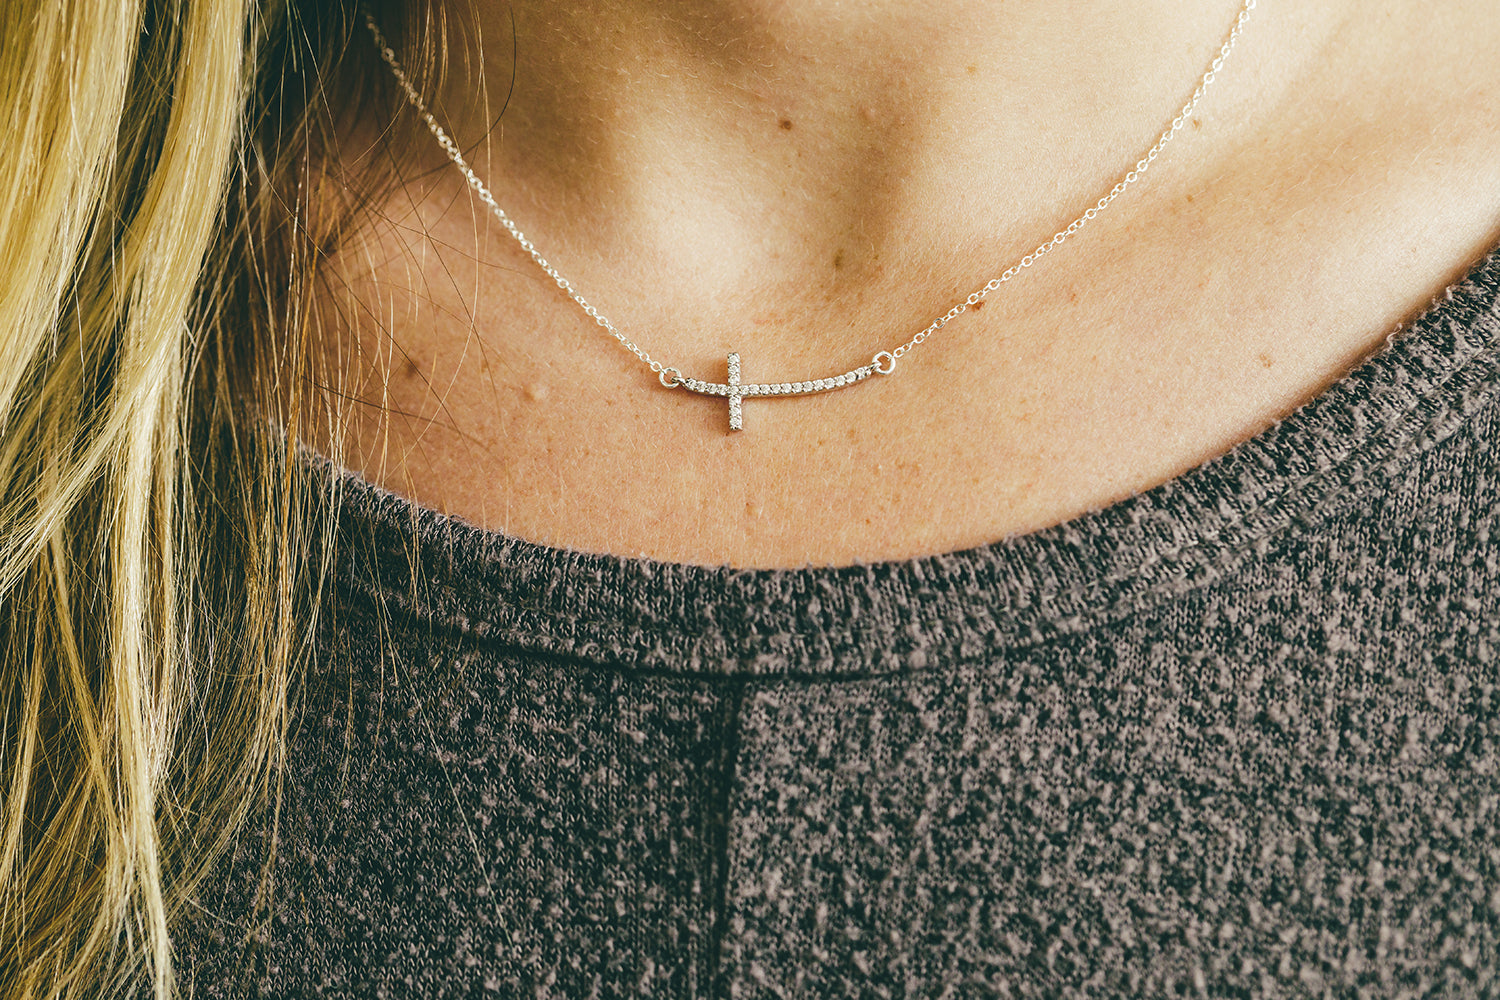 Layered Necklace / Sideways Cross Necklace | Neicea